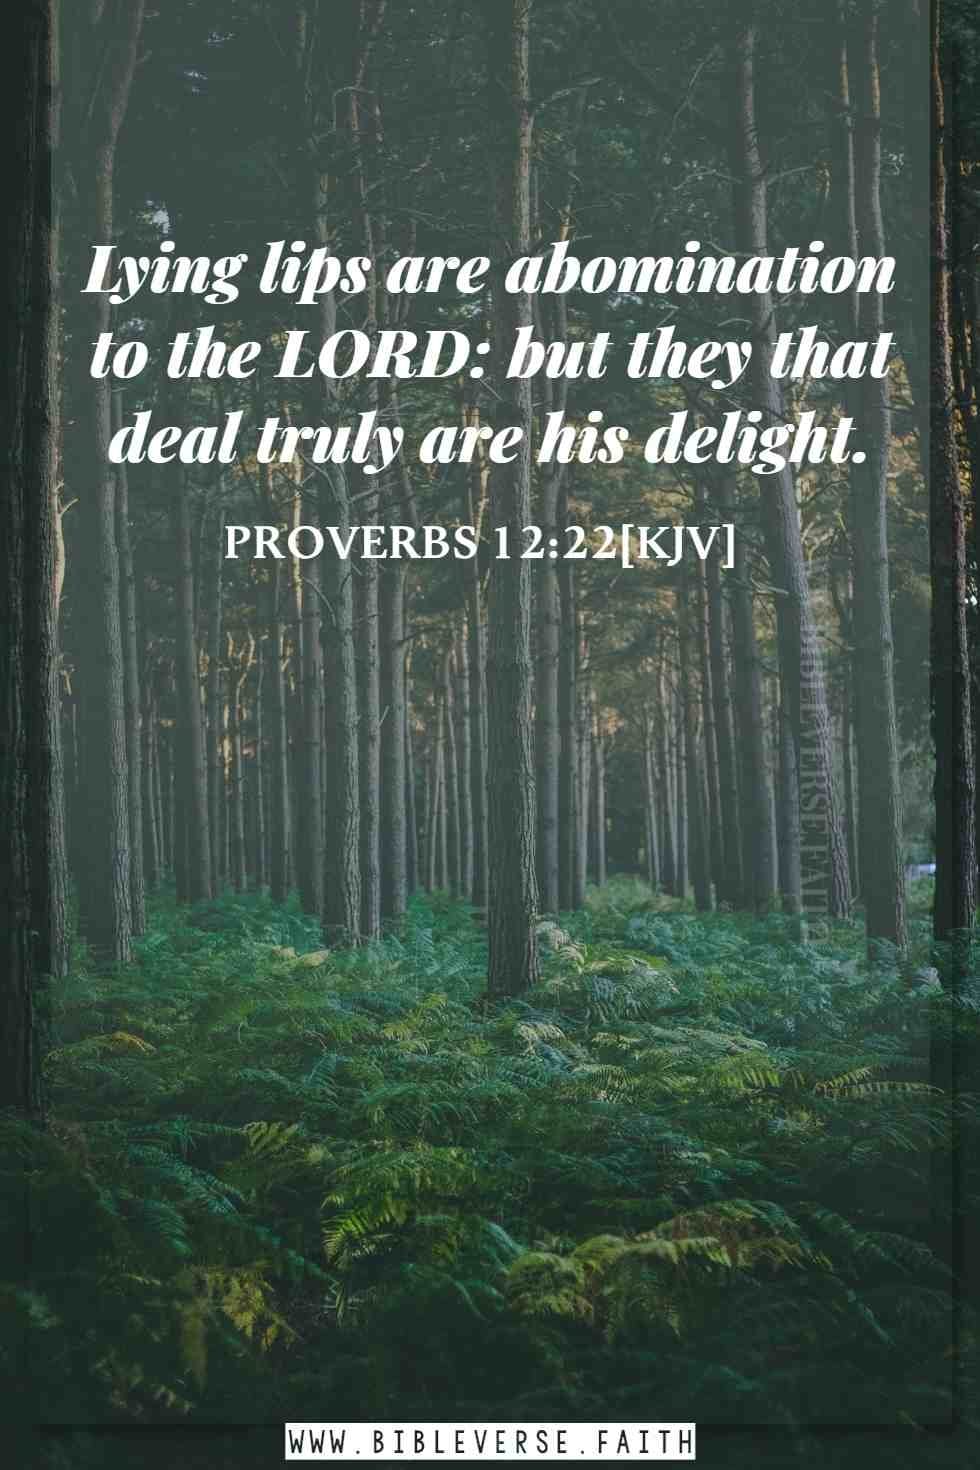 proverbs 12 22[kjv] abomination in the bible